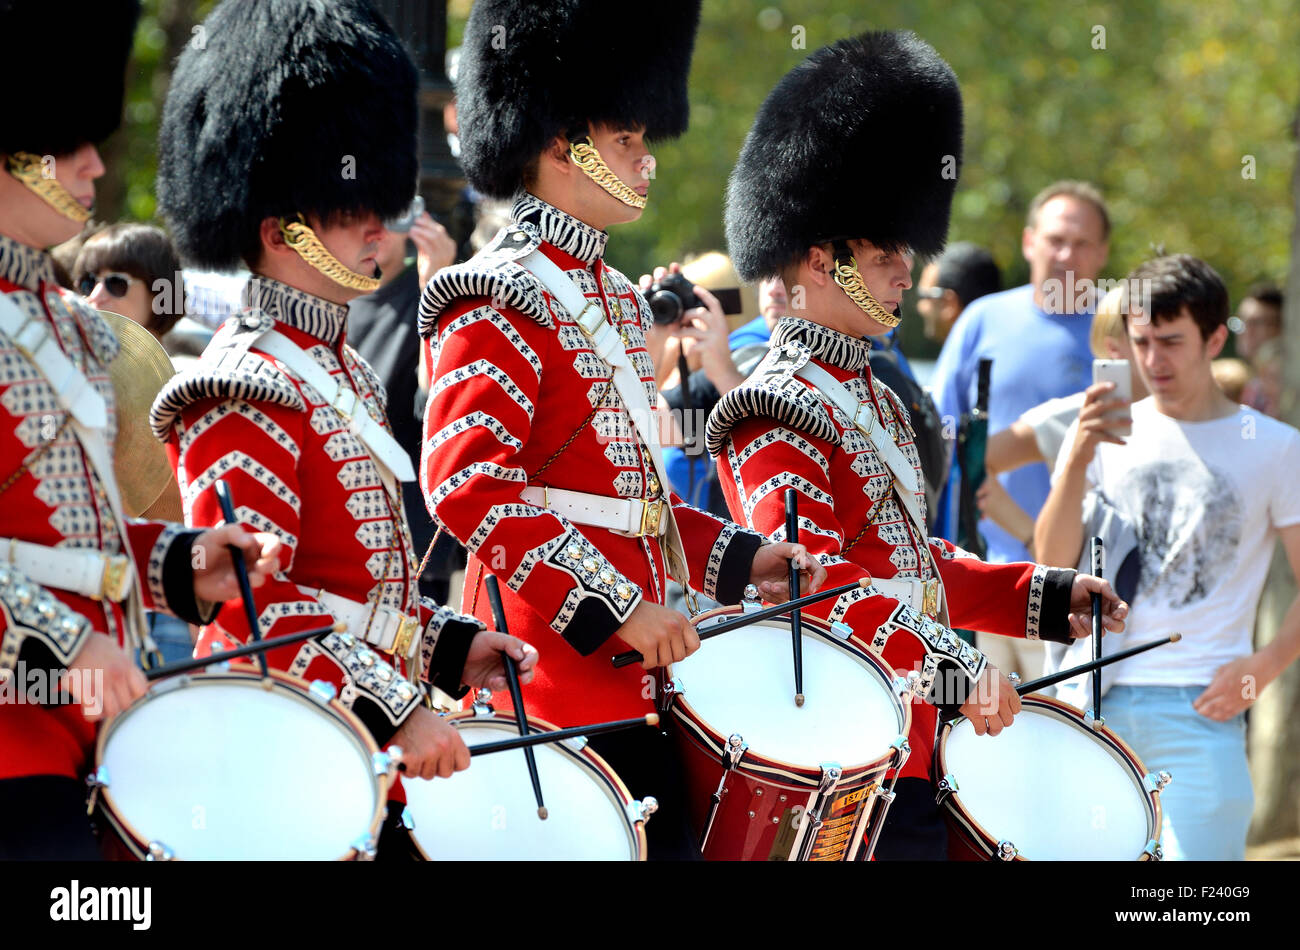 London, England, UK. Guardsmen drumming and marching after the Changing of the Guard - man filming on his mobile phone Stock Photo